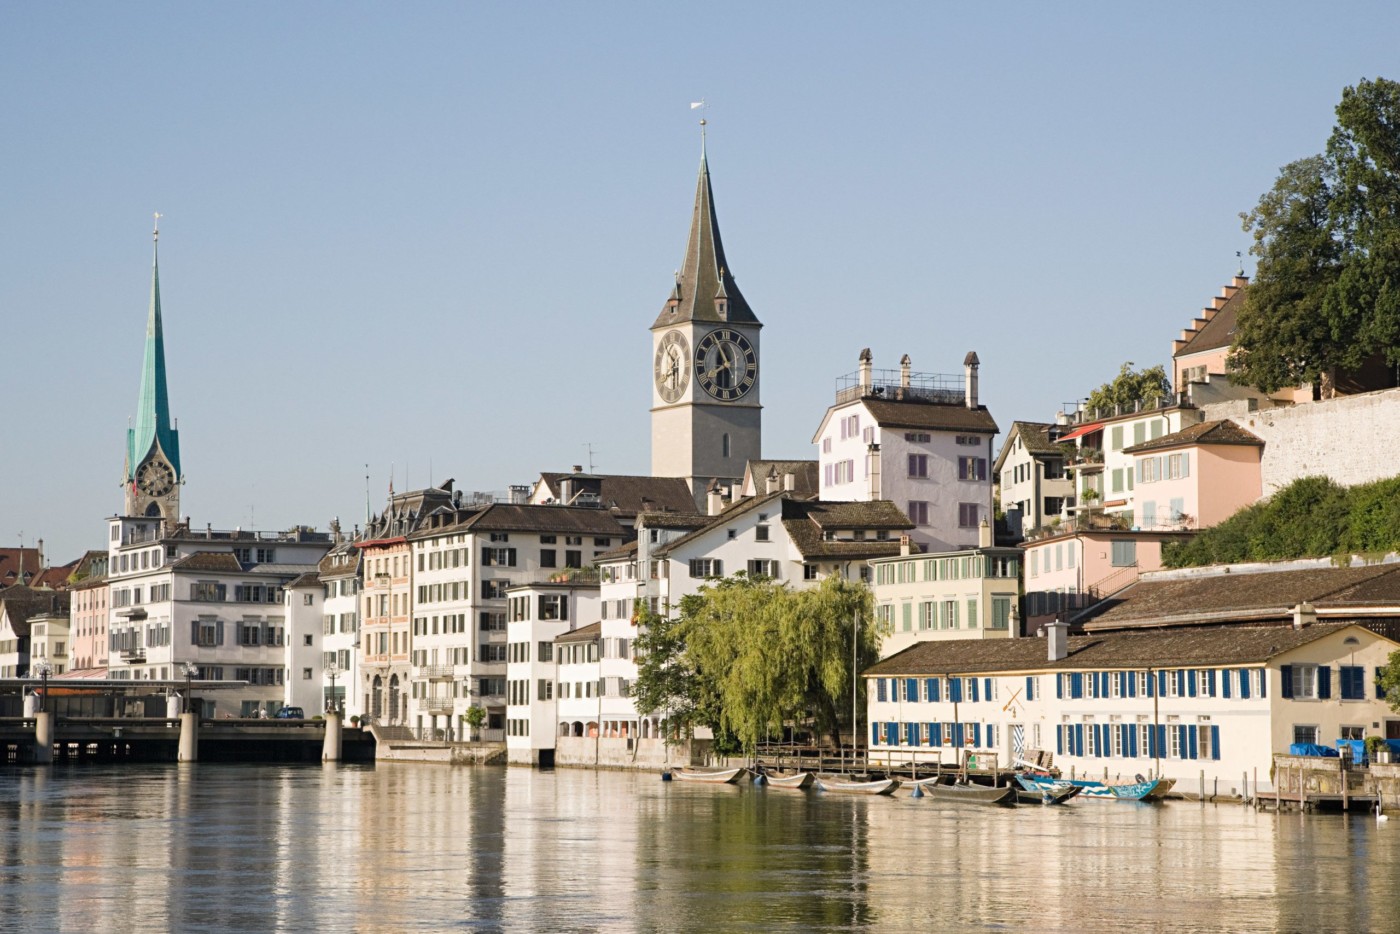 Architecture and the river limmat in zurich